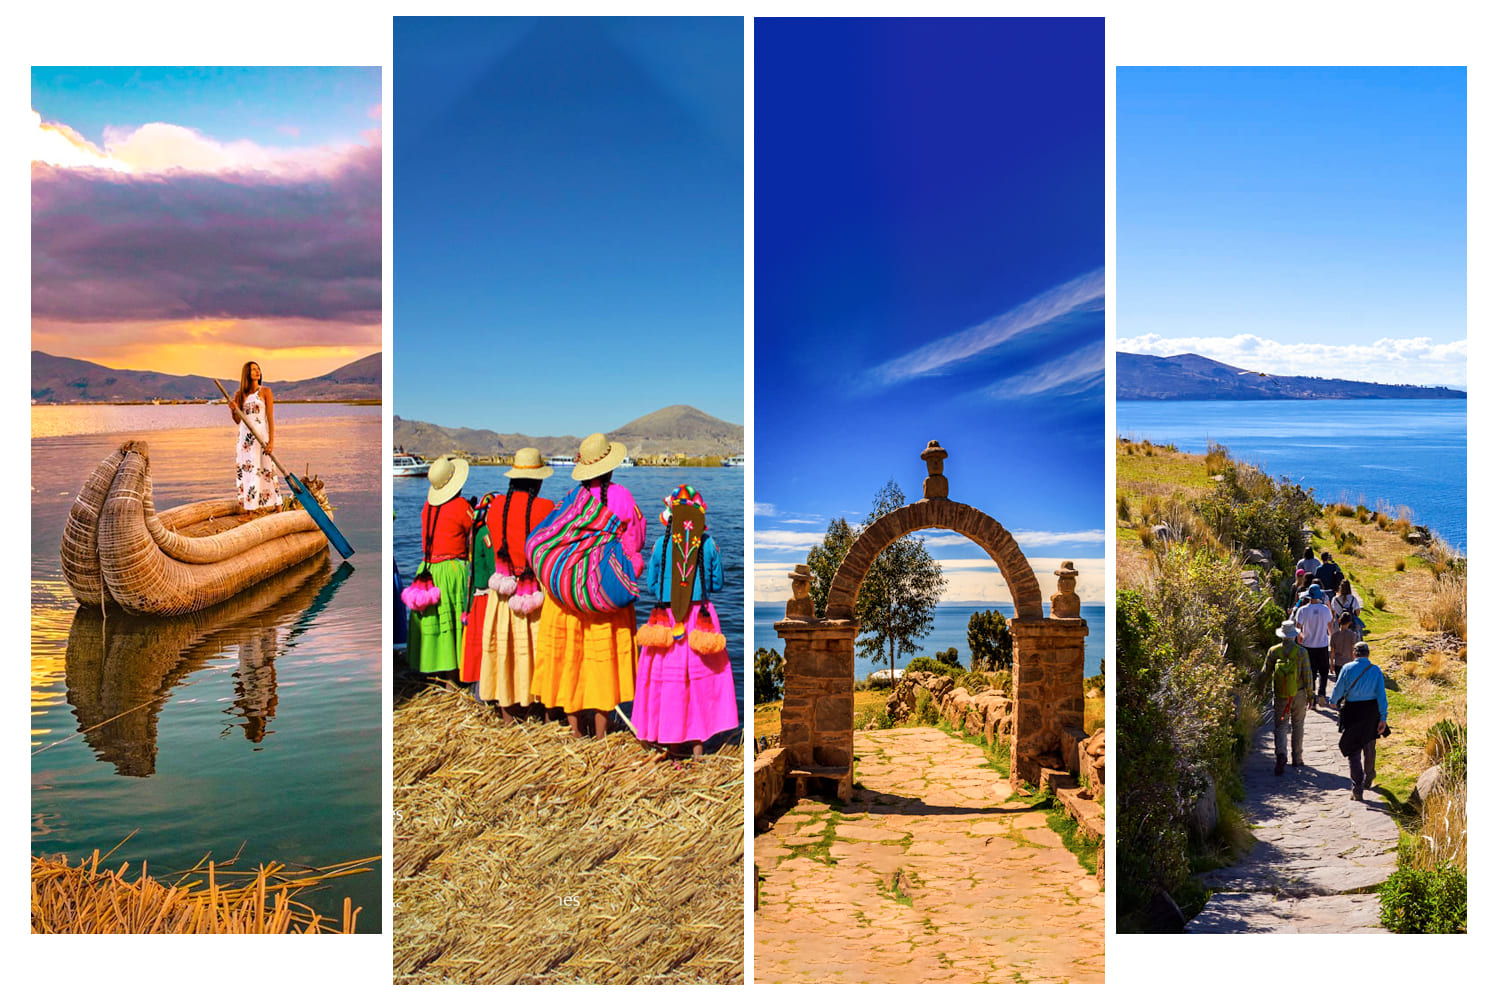 The islands of Lake Titicaca